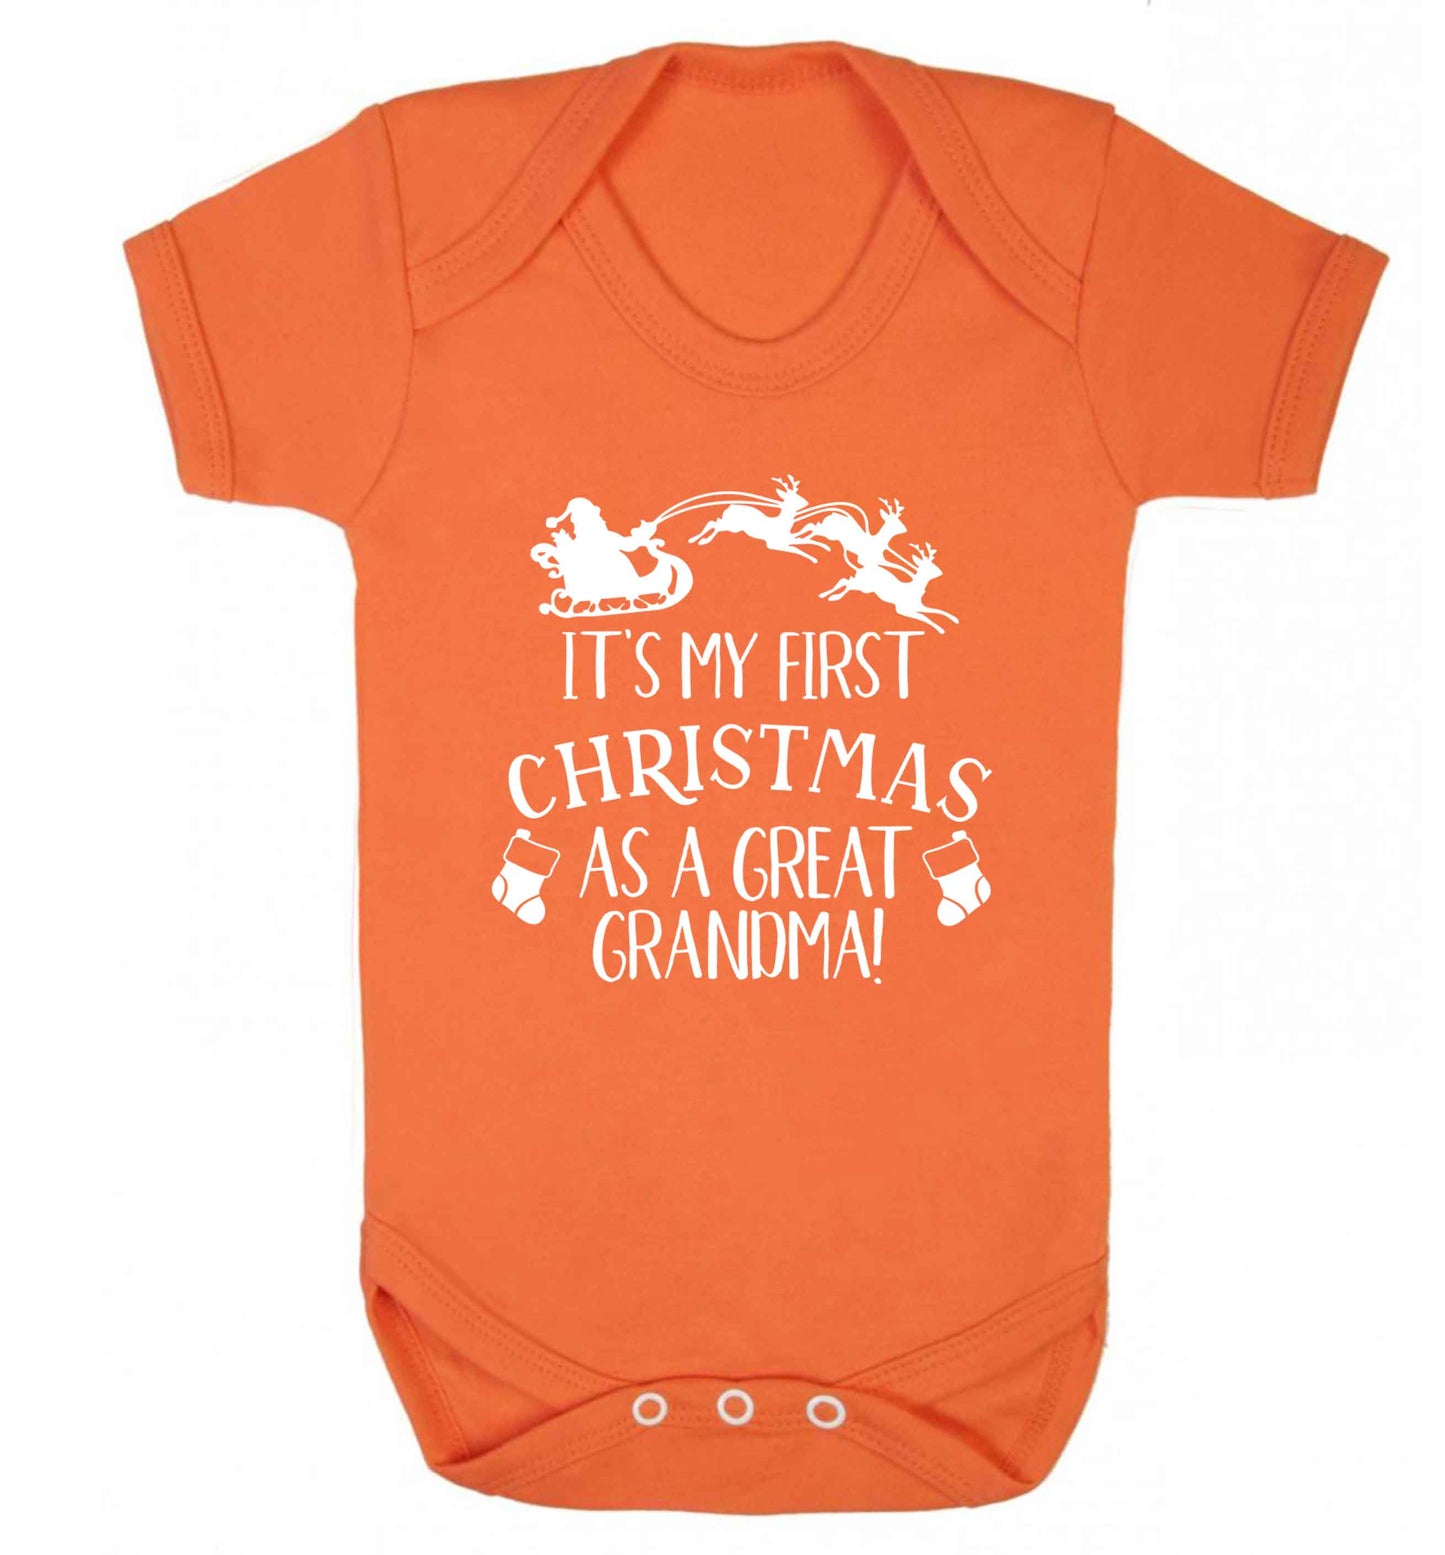 It's my first Christmas as a great grandma! Baby Vest orange 18-24 months